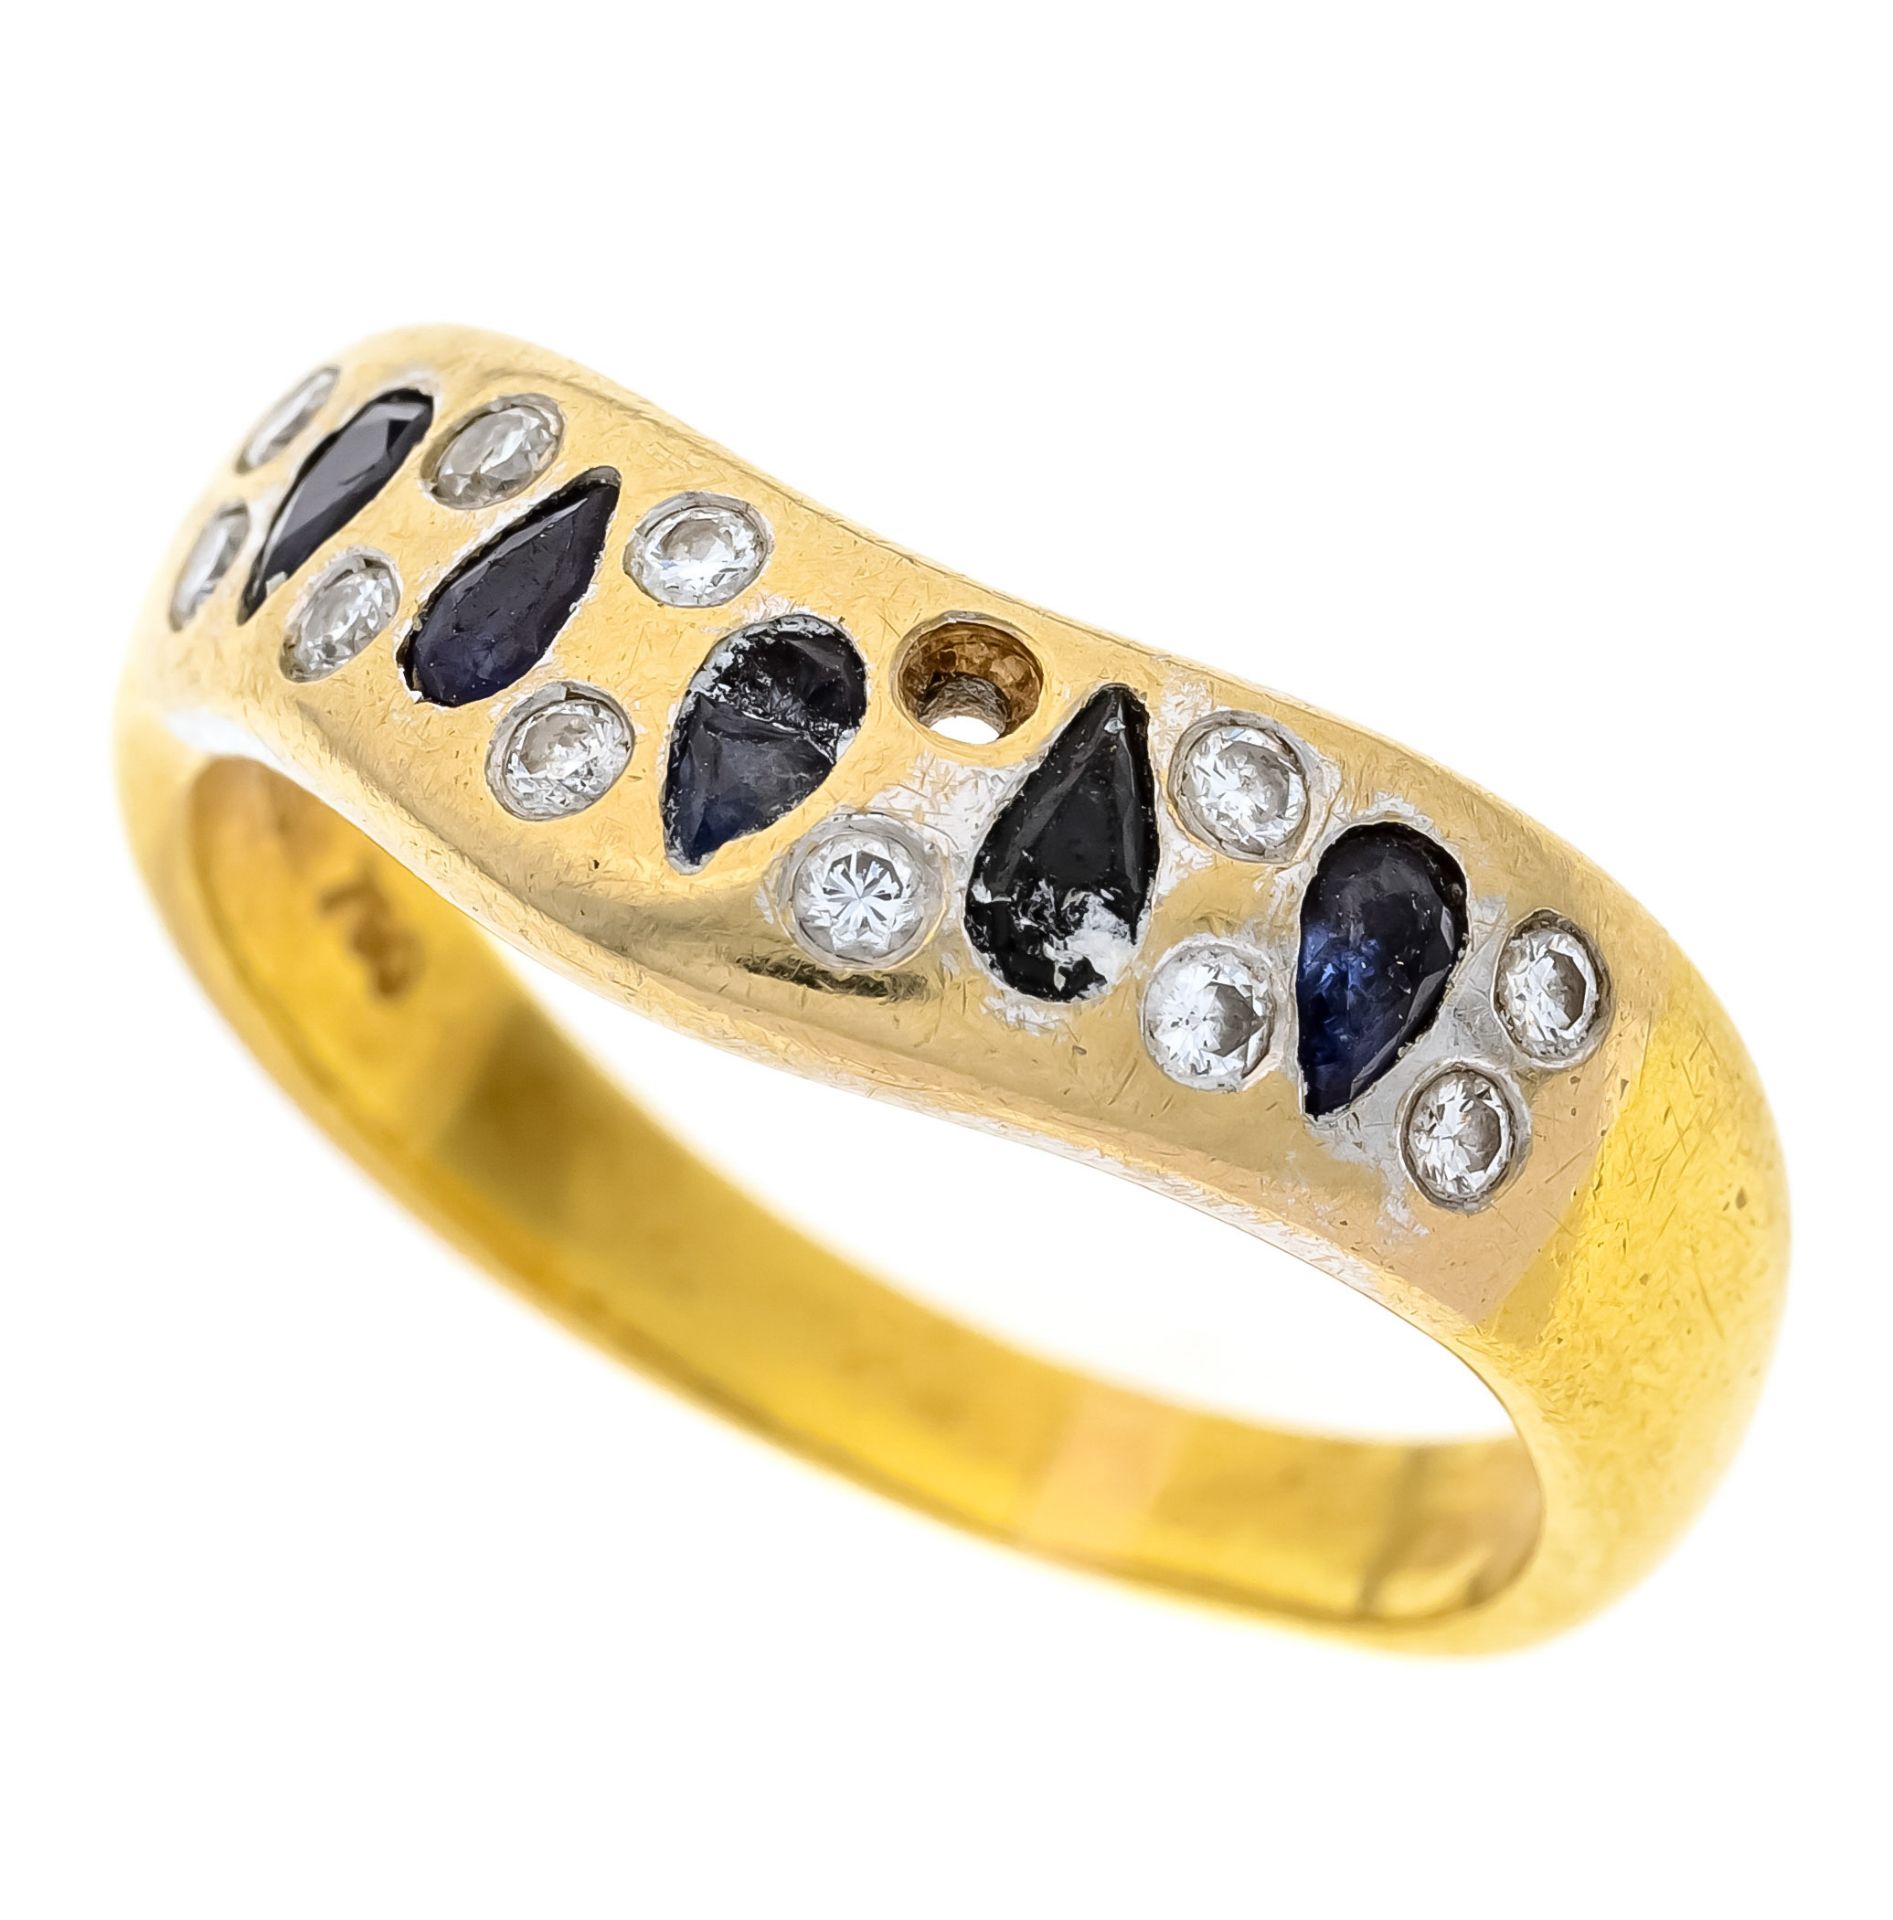 Sapphire diamond ring GG 750/000 with 5 faceted sahiren drops 3,5 x 2 mm, dark blue, opaque,